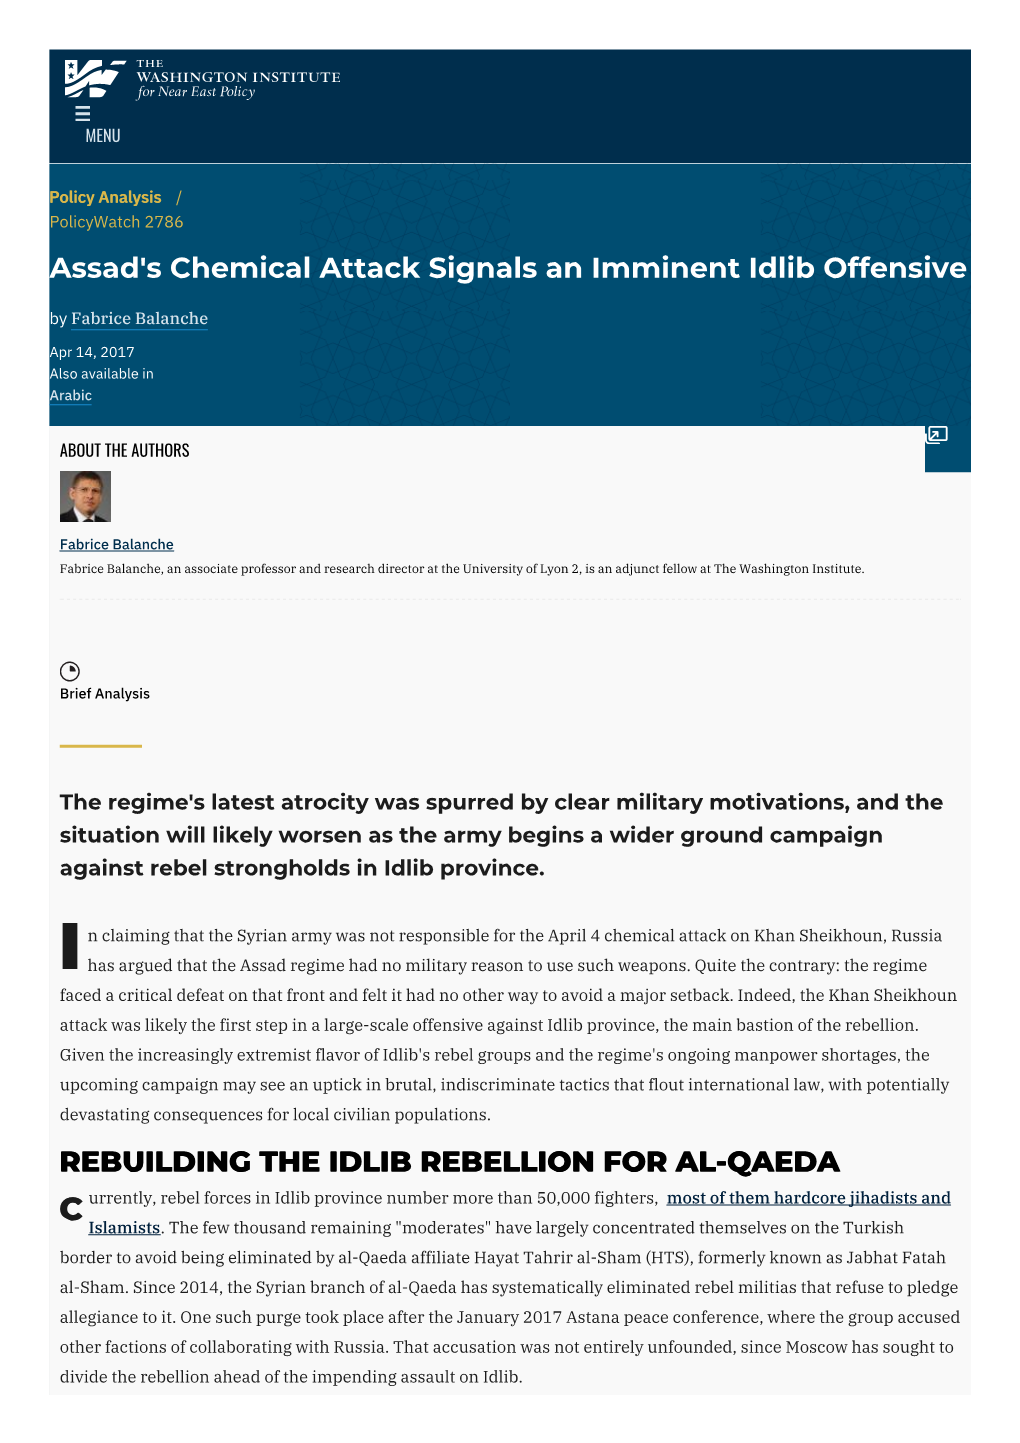 Assad's Chemical Attack Signals an Imminent Idlib Offensive by Fabrice Balanche